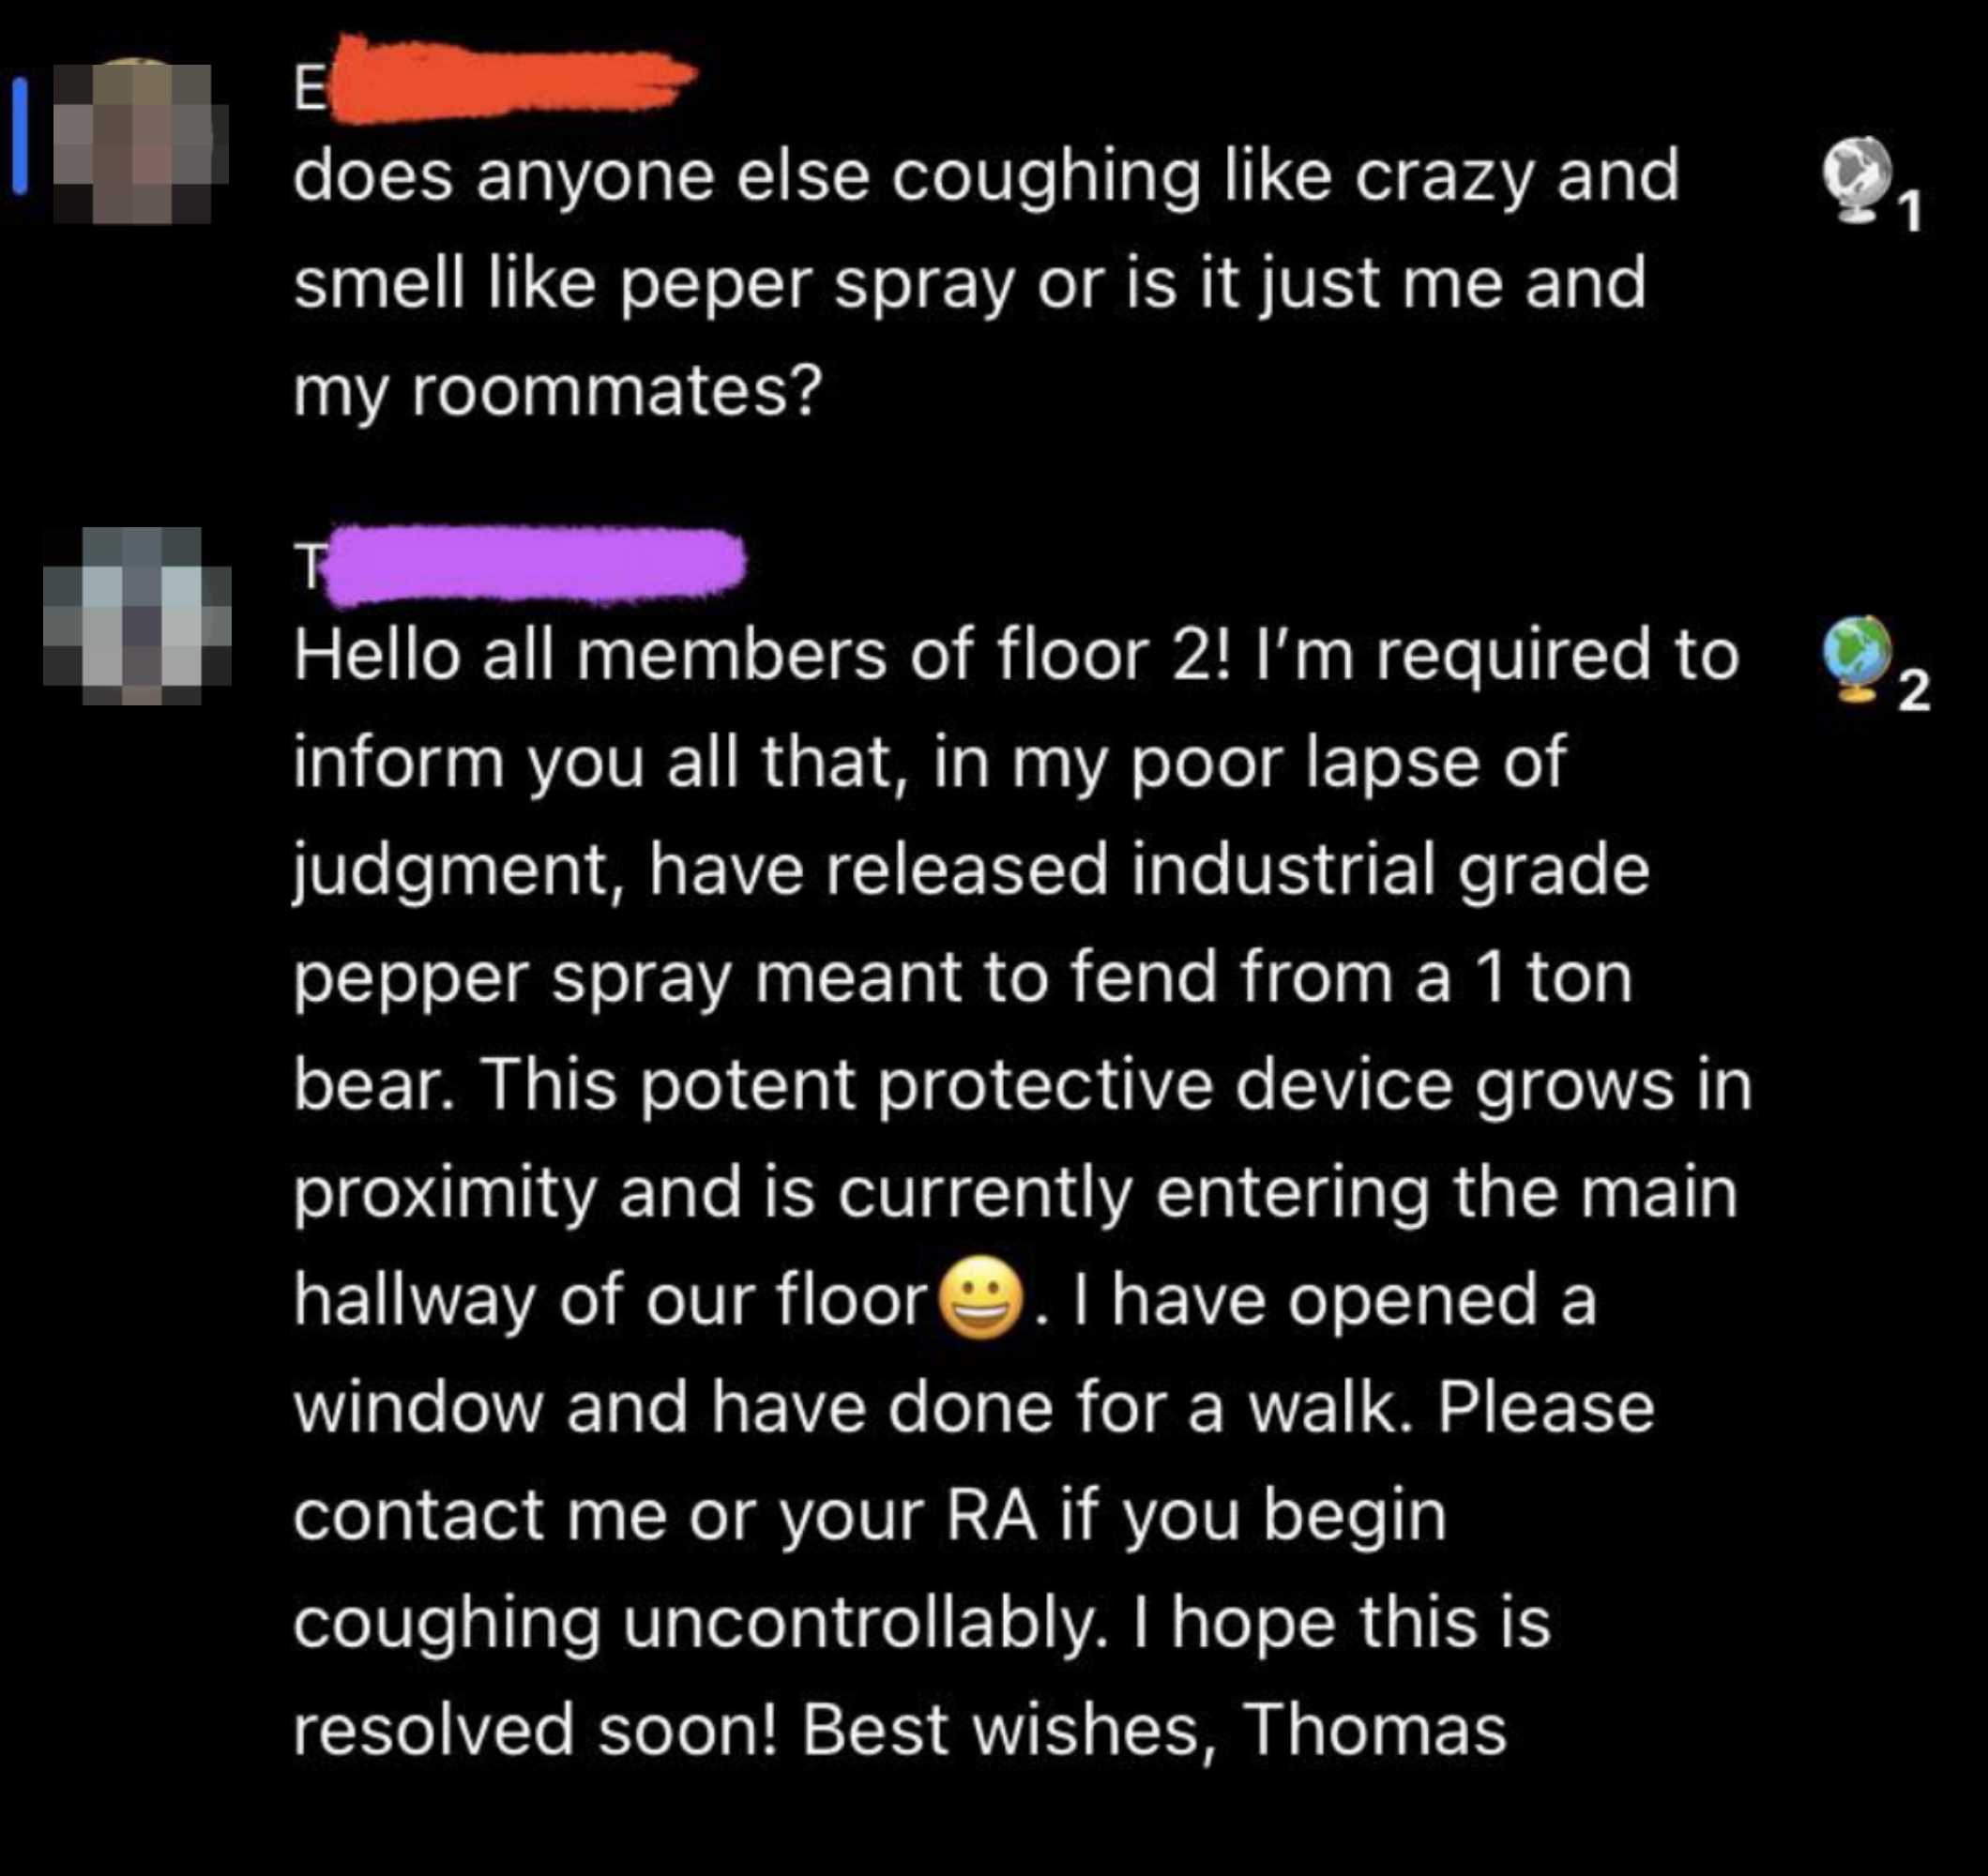 message saying someone accidentally released pepper spray in dorm